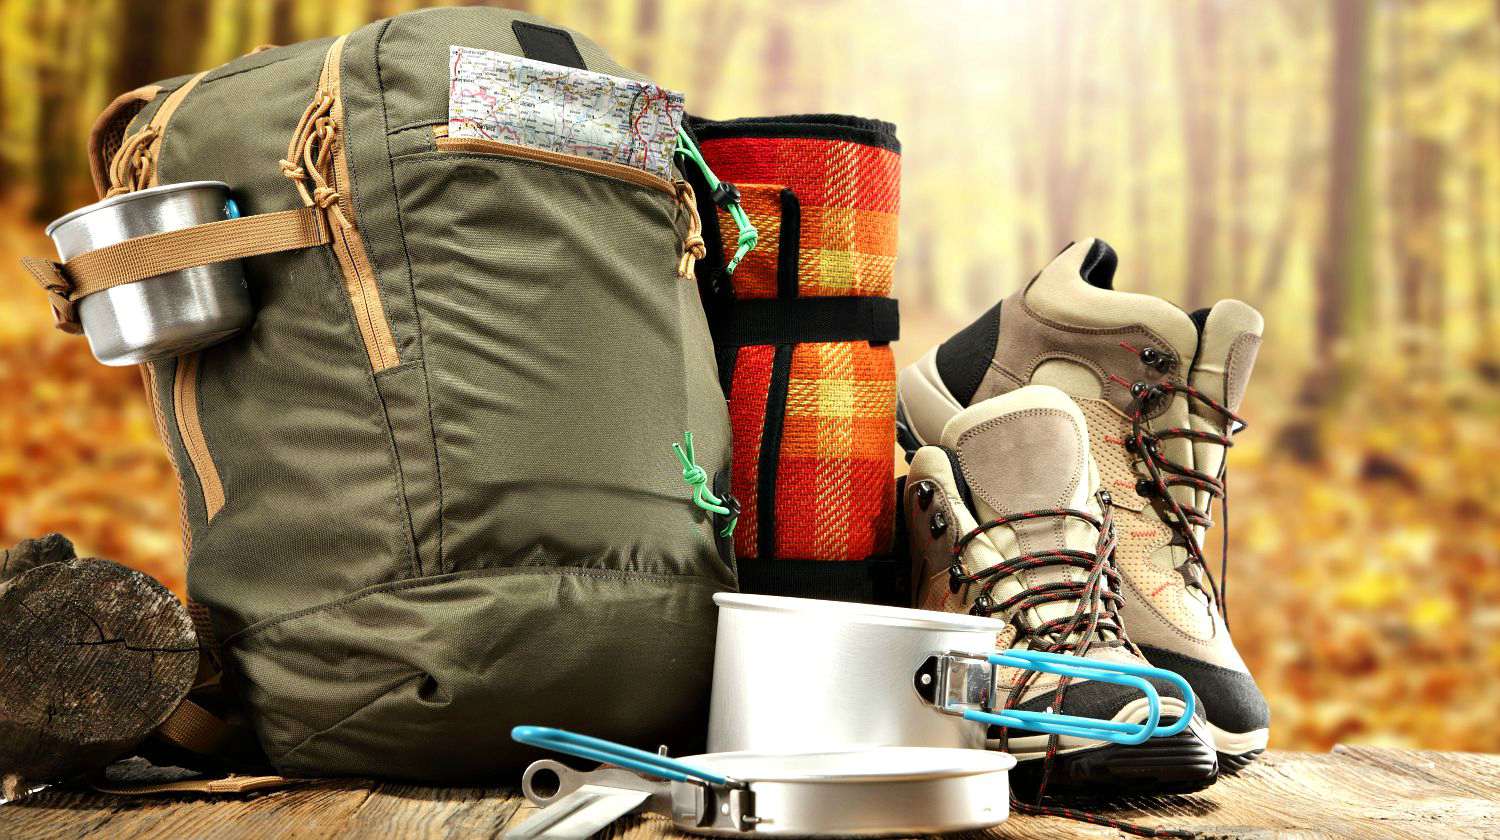 Sunny day in forest and shoes, backpack and plate | Camping Gears | Camp Like A Genius With These Additions | Featured